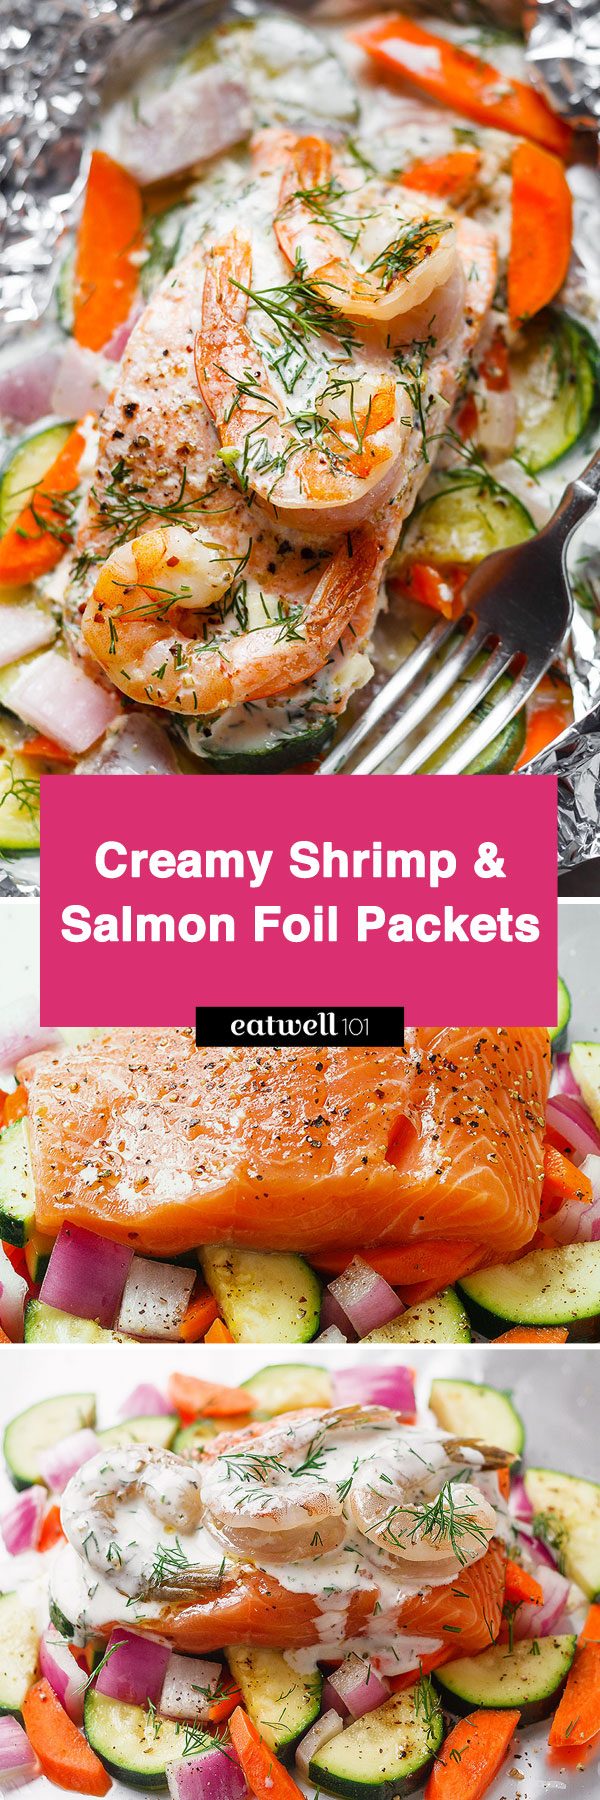 Creamy Shrimp and Salmon Foil Packets - Say hello to the easiest way to make salmon in foil packets!